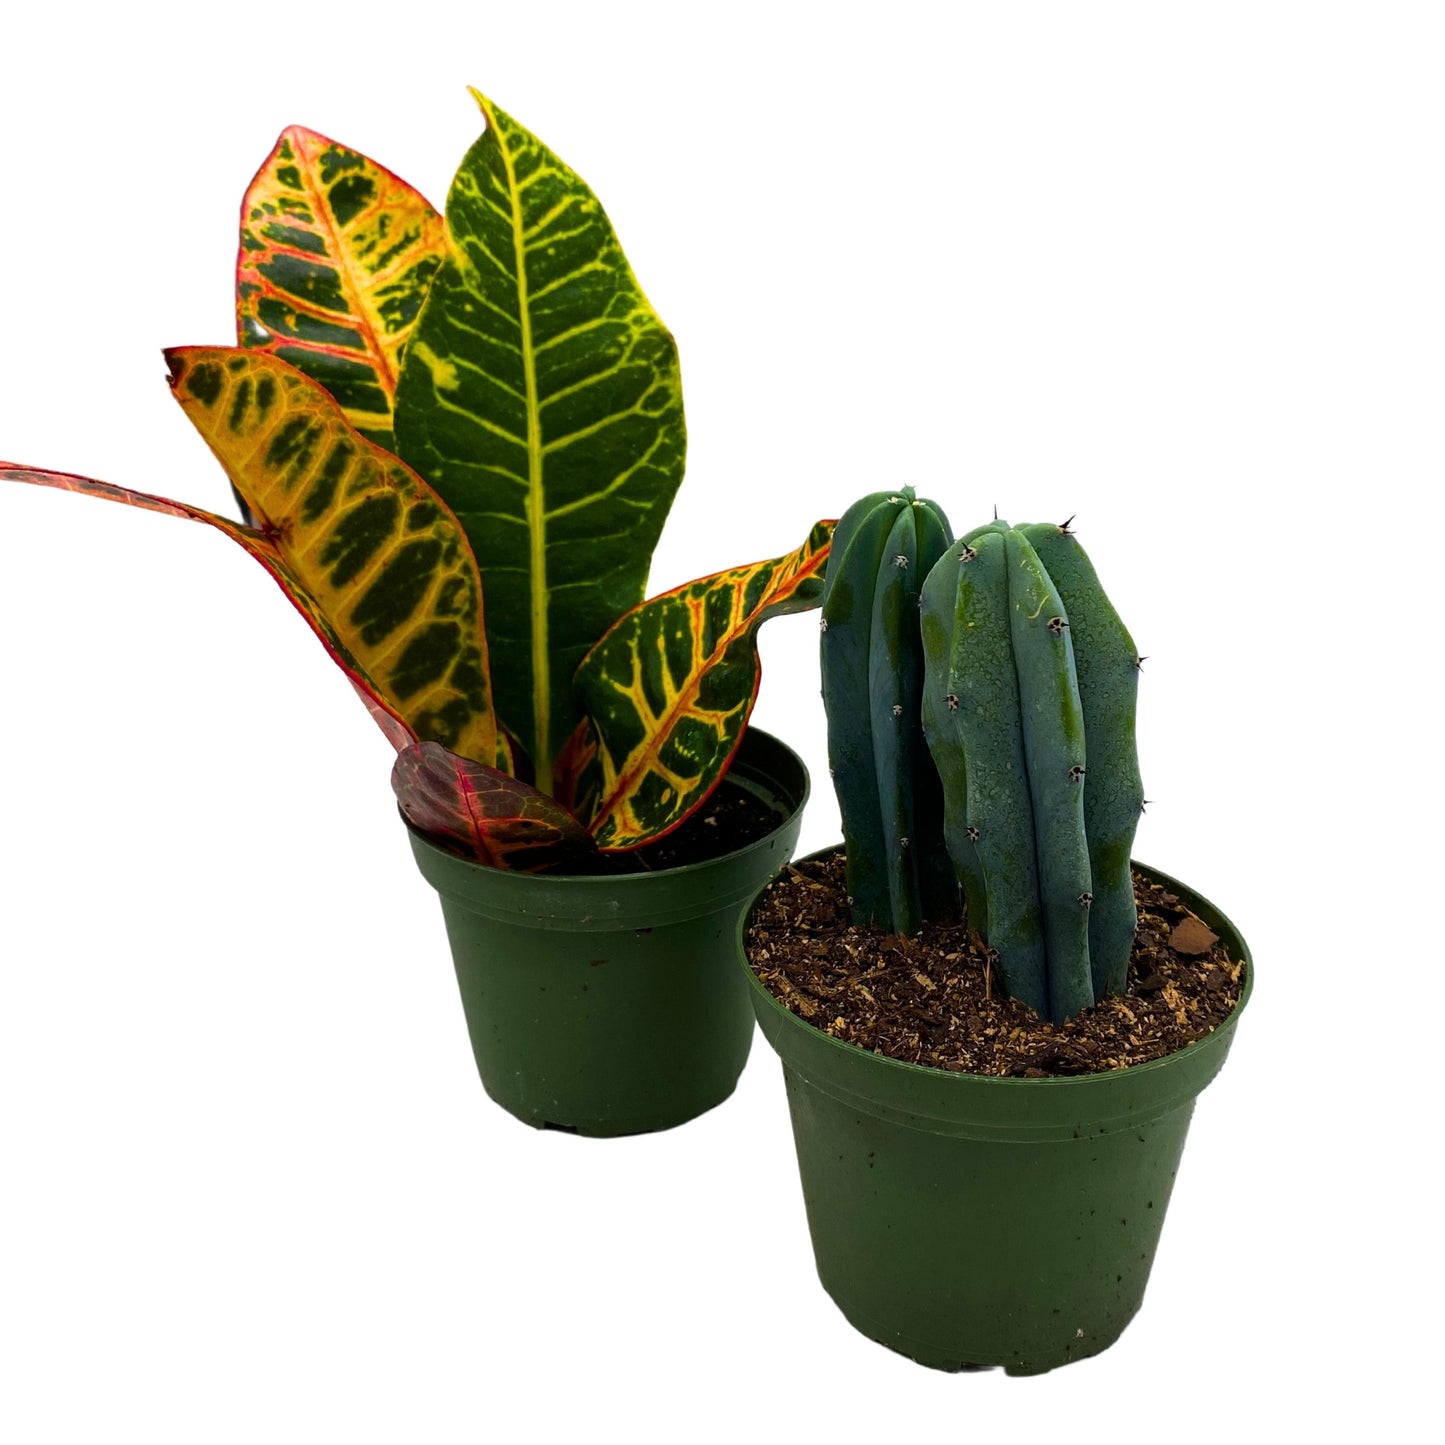 Plant Mystery Box, 4 inch pots, set of 2, Monthly Subscription, Always Different Houseplants